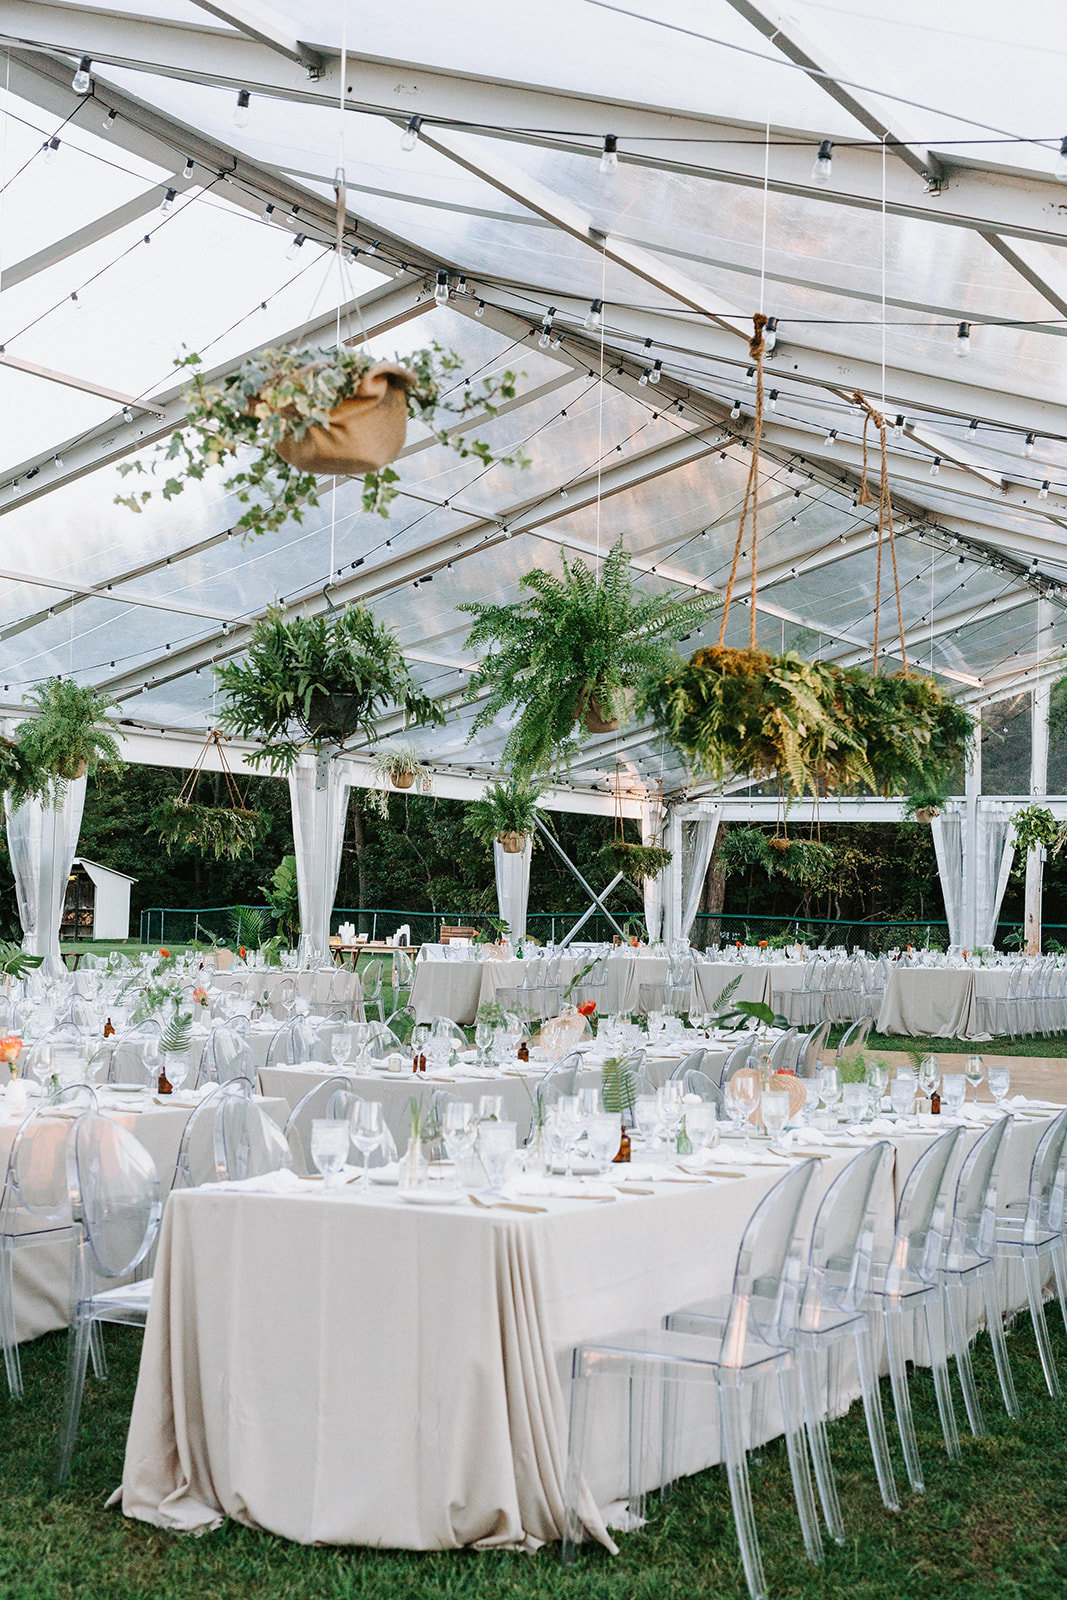 Monica-Relyea-Events-Hyde-Photography-Camp-Scatico-Wedding-Upstate-New-York-NY-Hudson-Valley-Elizaville-Tivoli-Tropical-Clear-Tent-Outdoor-NYC-Planner-Fall-Jewish-618